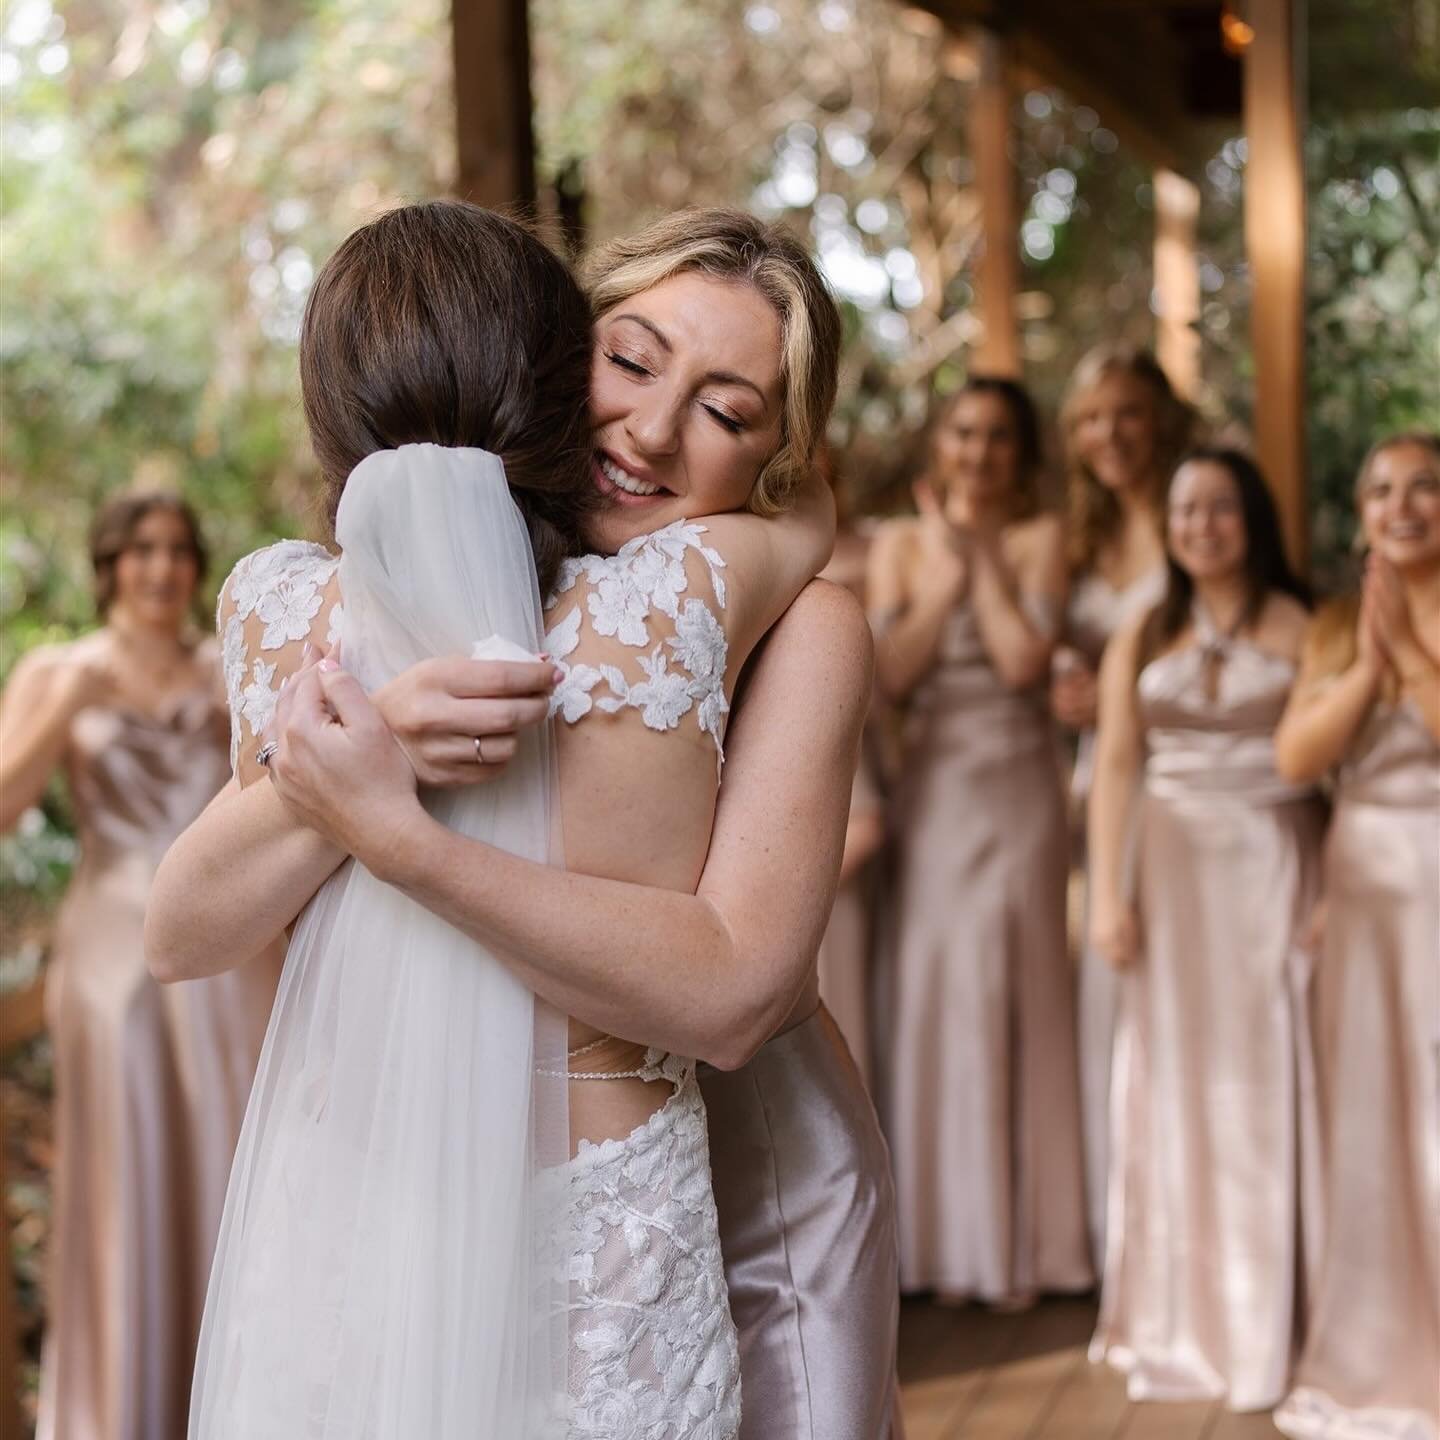 Every time there&rsquo;s a first look with a bridal party, whether I&rsquo;m the photographer or whether I&rsquo;m a bridesmaid myself, it always makes me tear up.

We talk about your wedding like it&rsquo;s all about you and your partner, and it is,